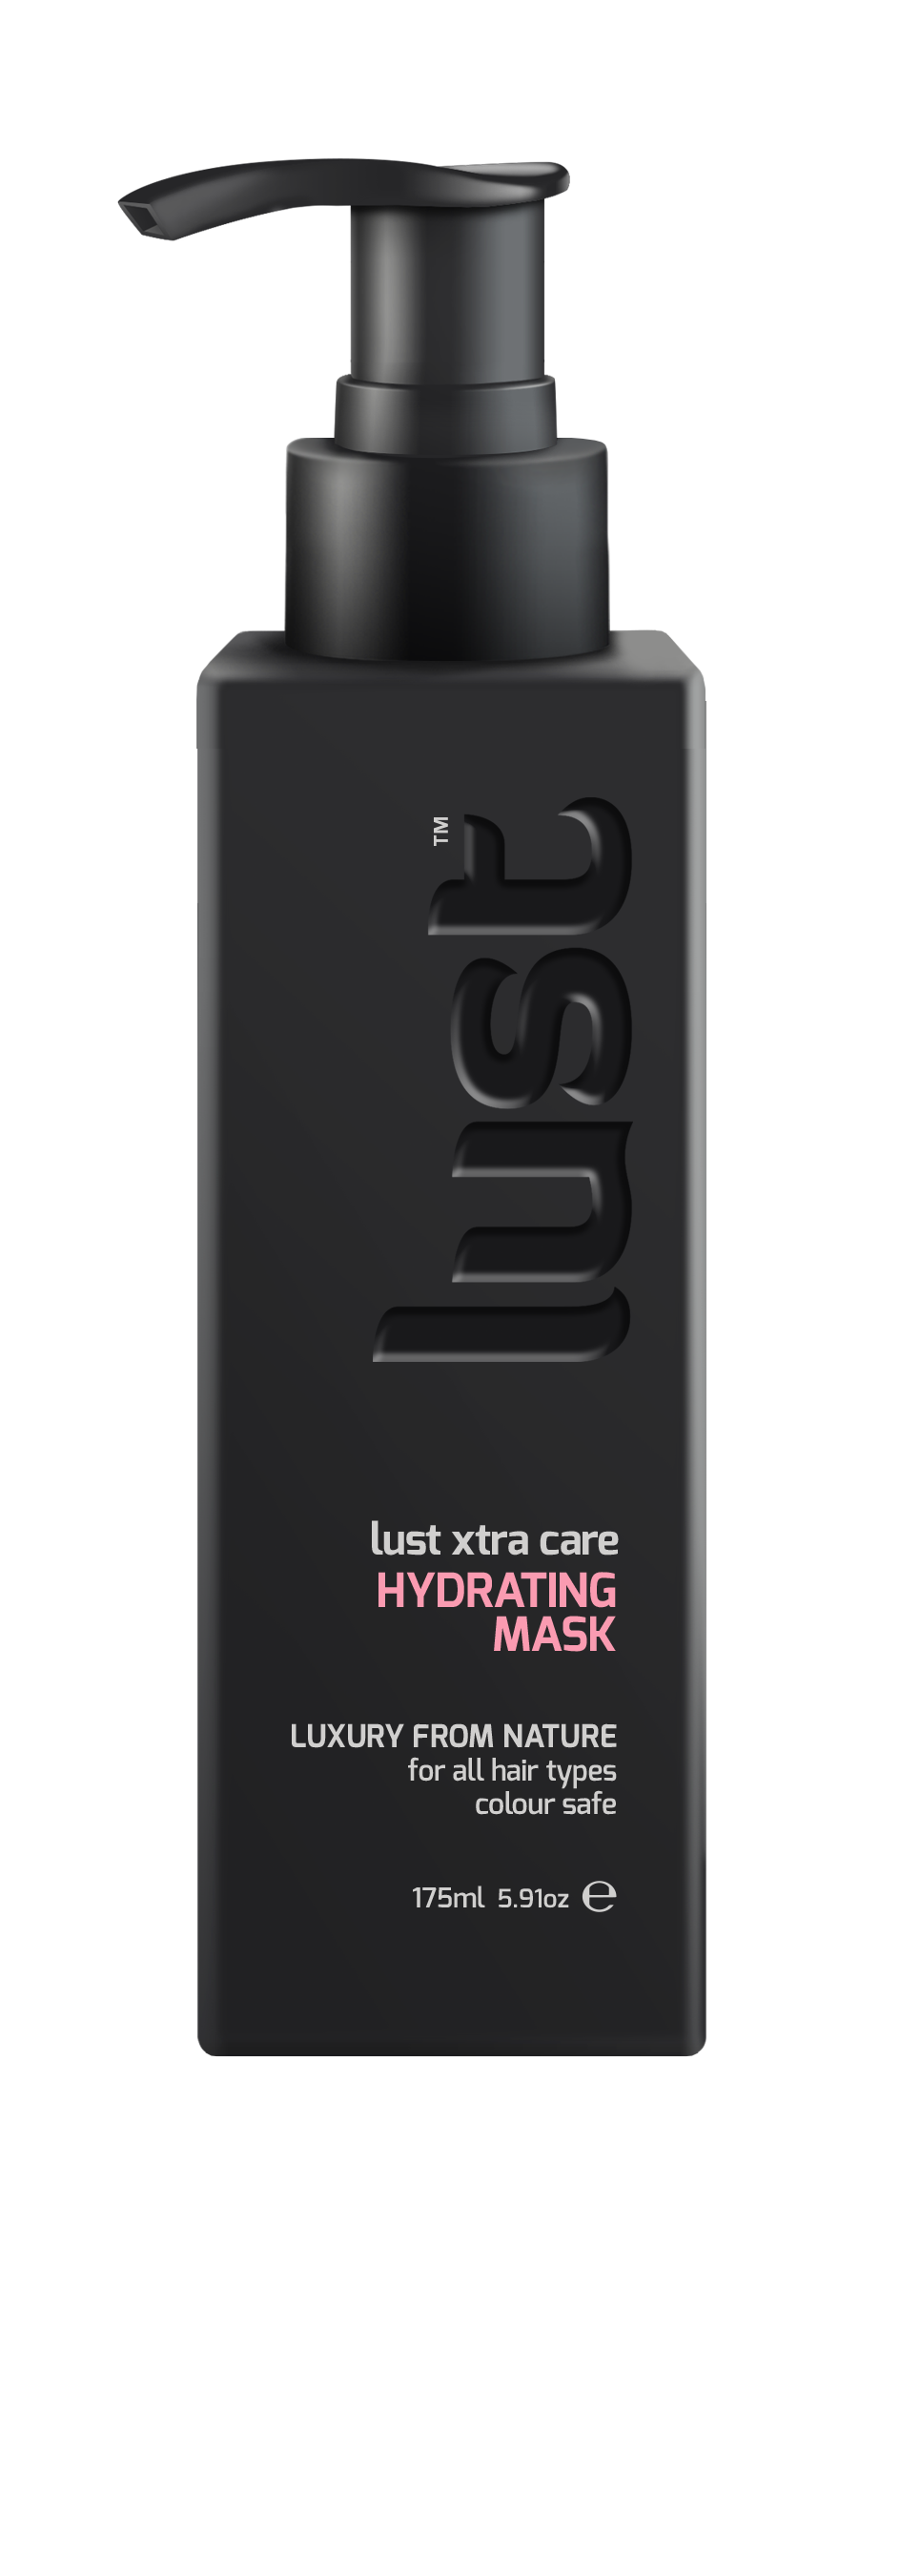 Lust Xtra Care Hydrating Mask 175mls